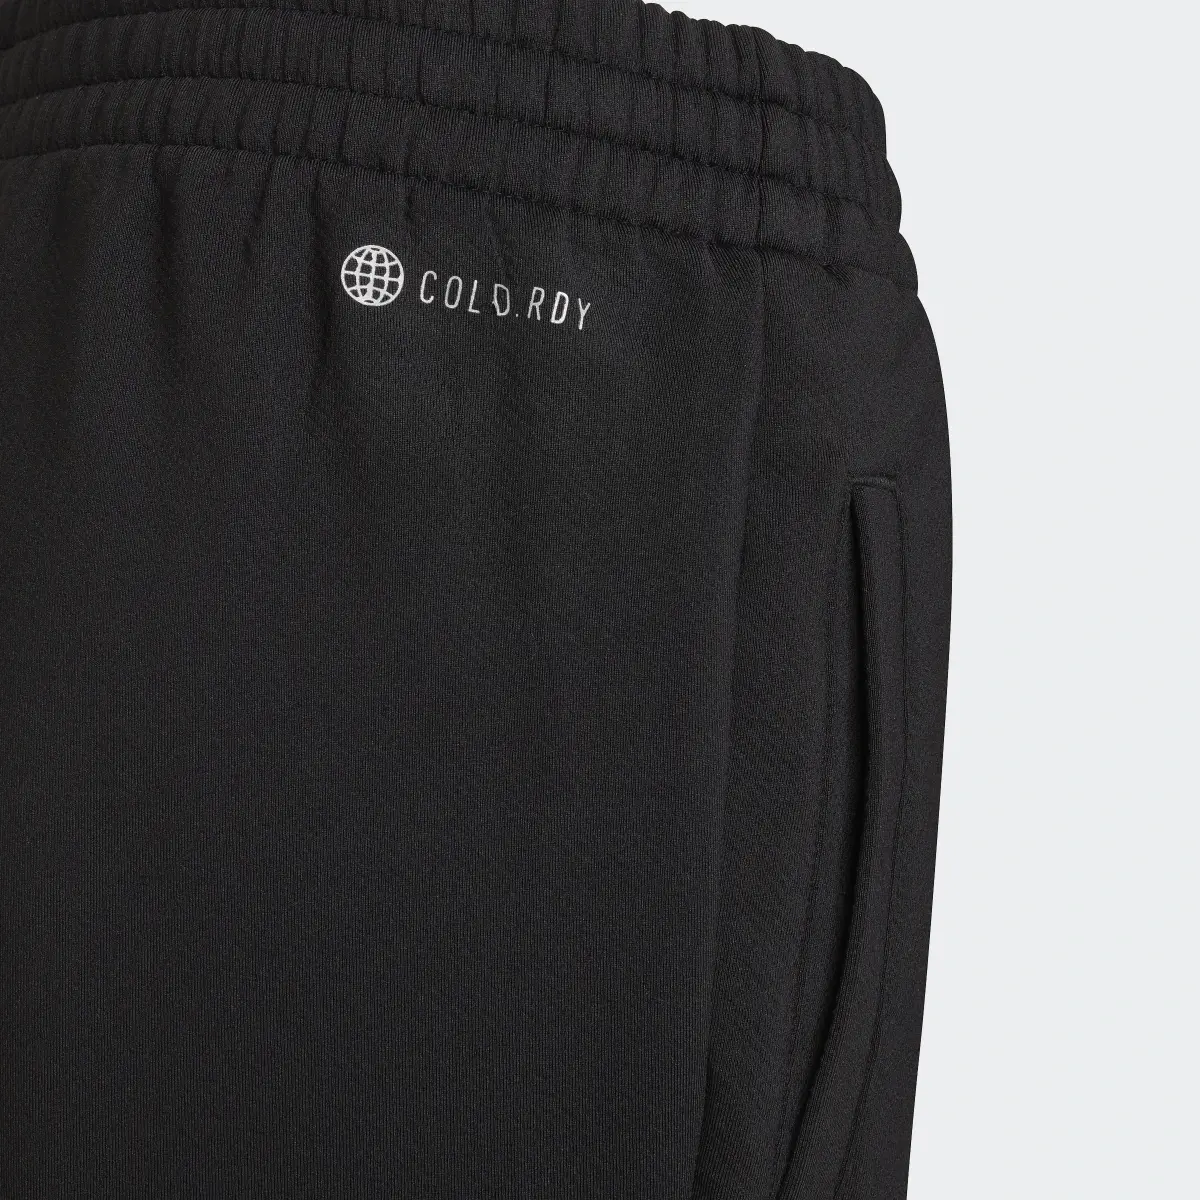 Adidas COLD.RDY Sport Icons Training Pants. 3